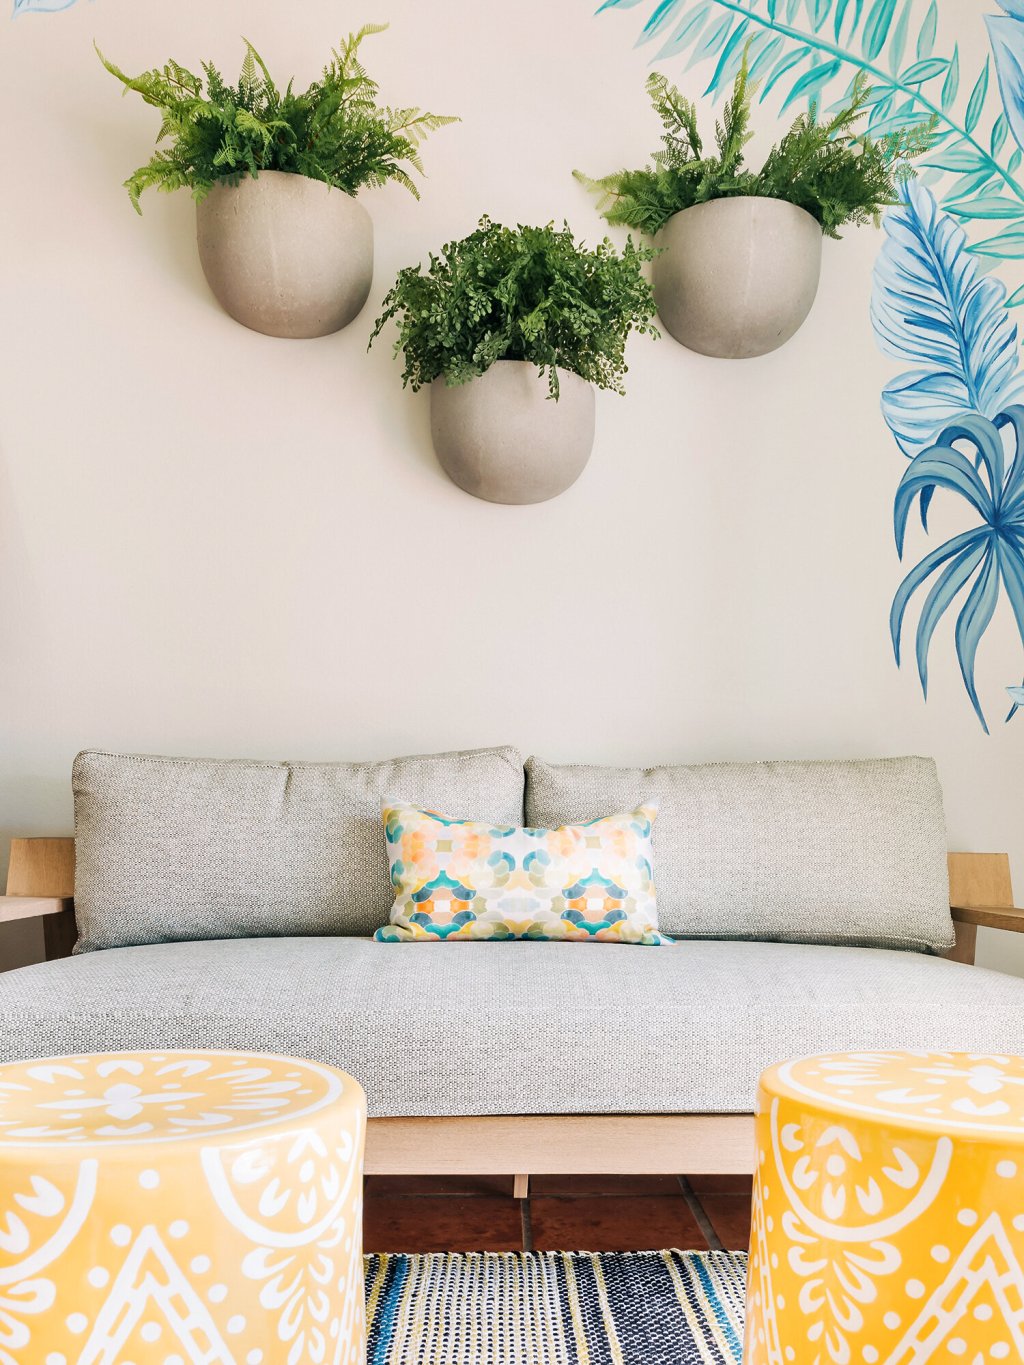 How To Create A Cohesive Color Pallet In Your Space